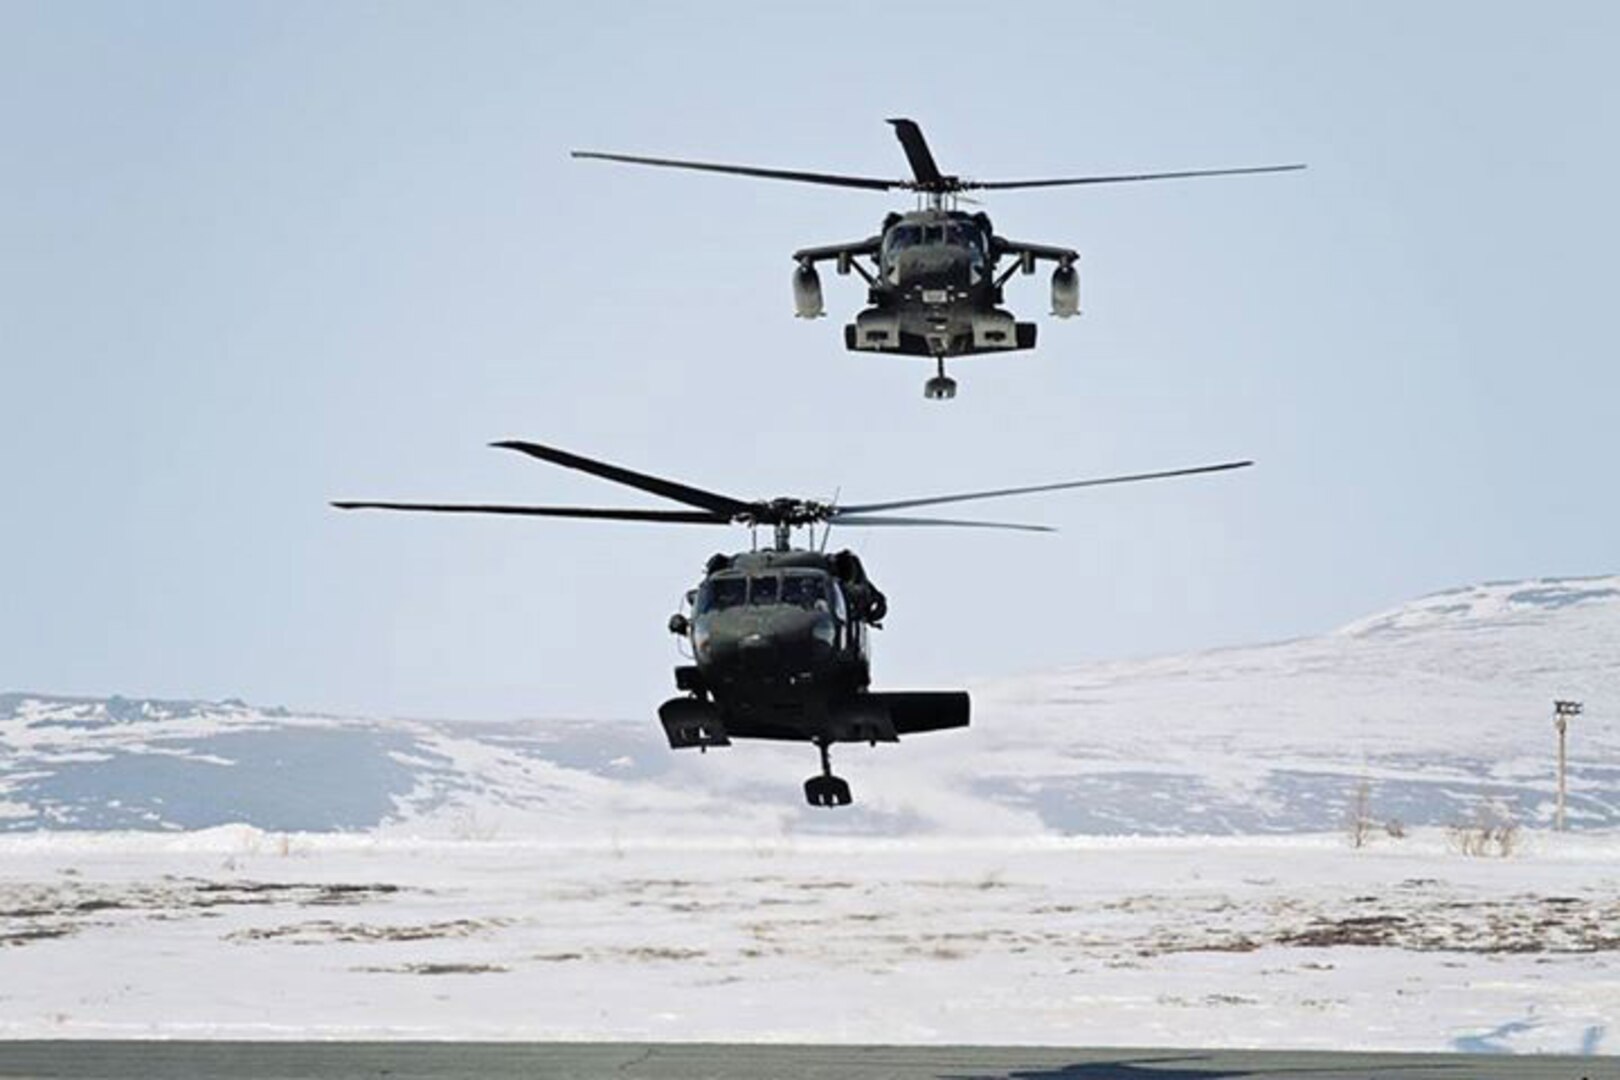 A pair of Alaska Army National Guard UH-60 Black Hawk helicopters taxi after pilots land at the Alaska Army National Guard Army Aviation Support Facility in Nome April 17, 2012. A similar craft rescued a stranded hiker on June 5, 2014.